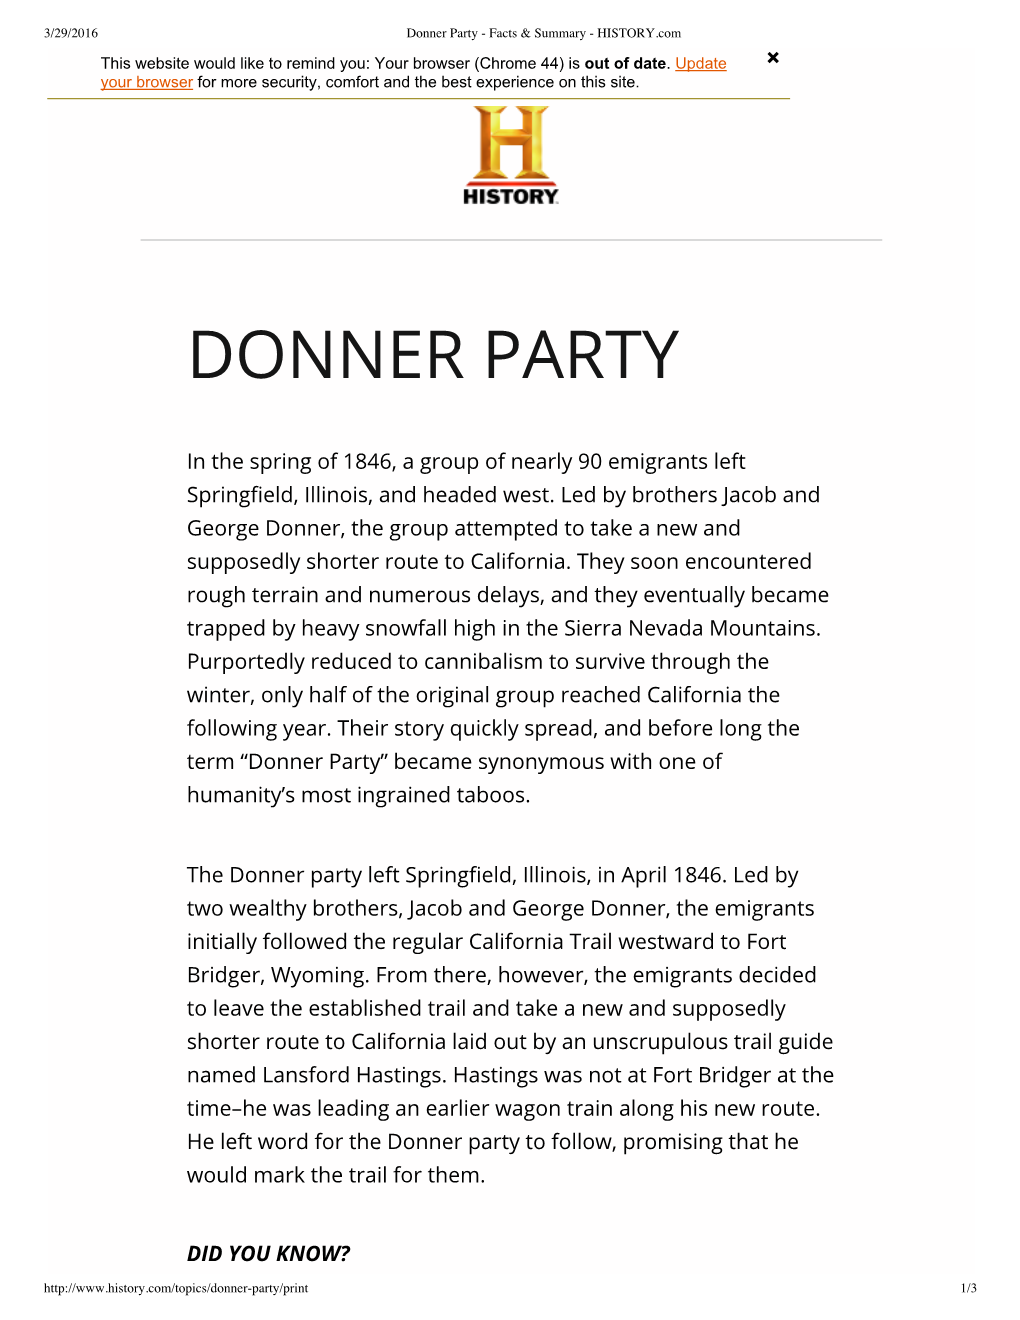 Donner Party - Facts & Summary - HISTORY.Com This Website Would Like to Remind You: Your Browser (Chrome 44) Is out of Date